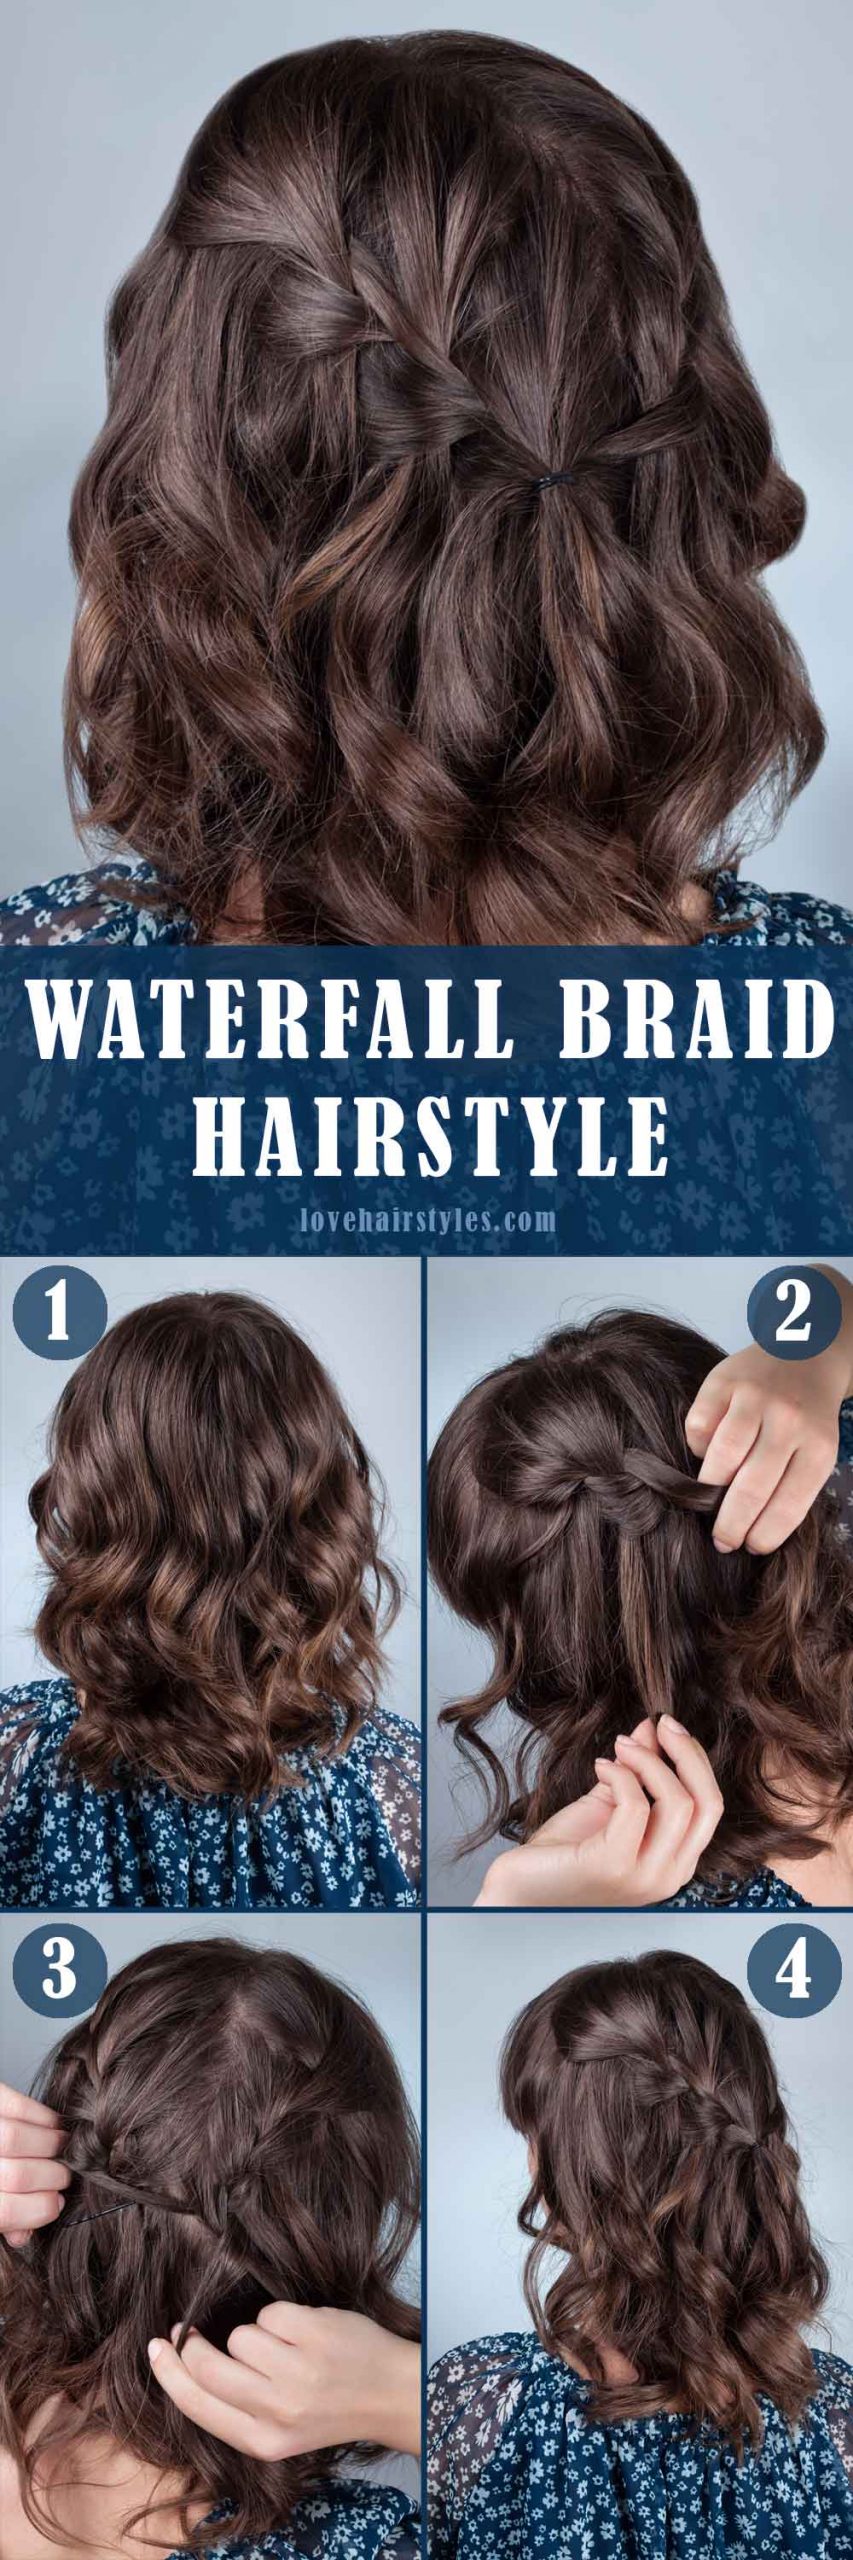 25 Easy Hairstyles for Medium-Length Hair to Do in Minutes | Who What Wear  UK